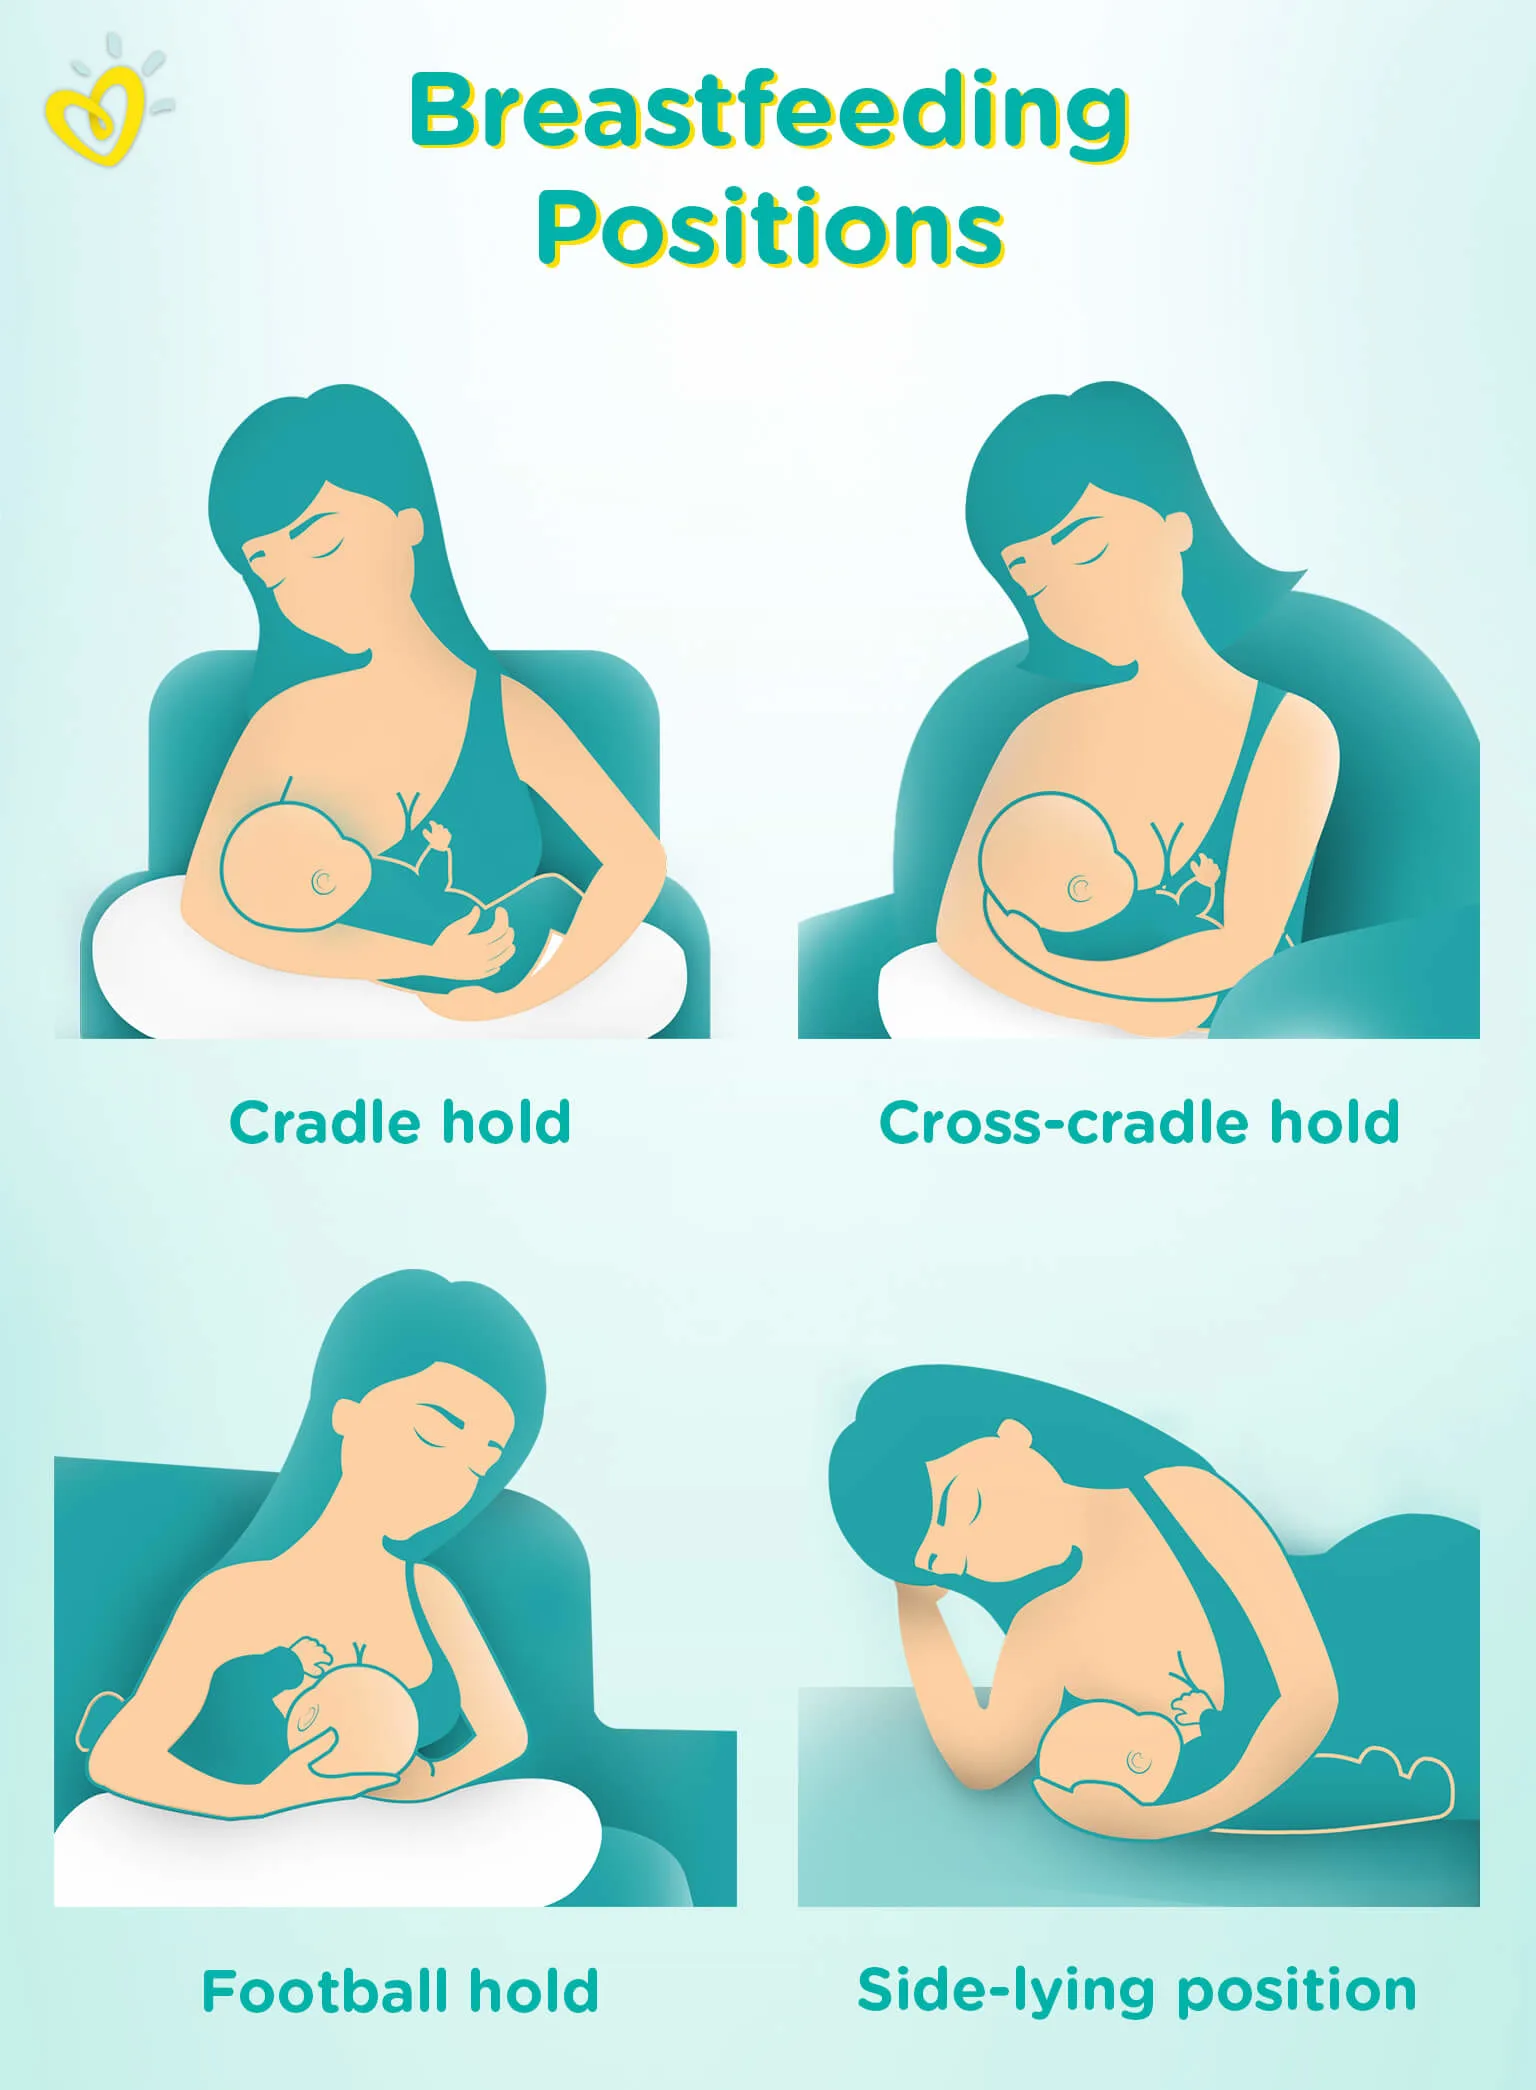 Ouch! 8 Tips for Nipple Pain Relief When Breastfeeding a Newborn